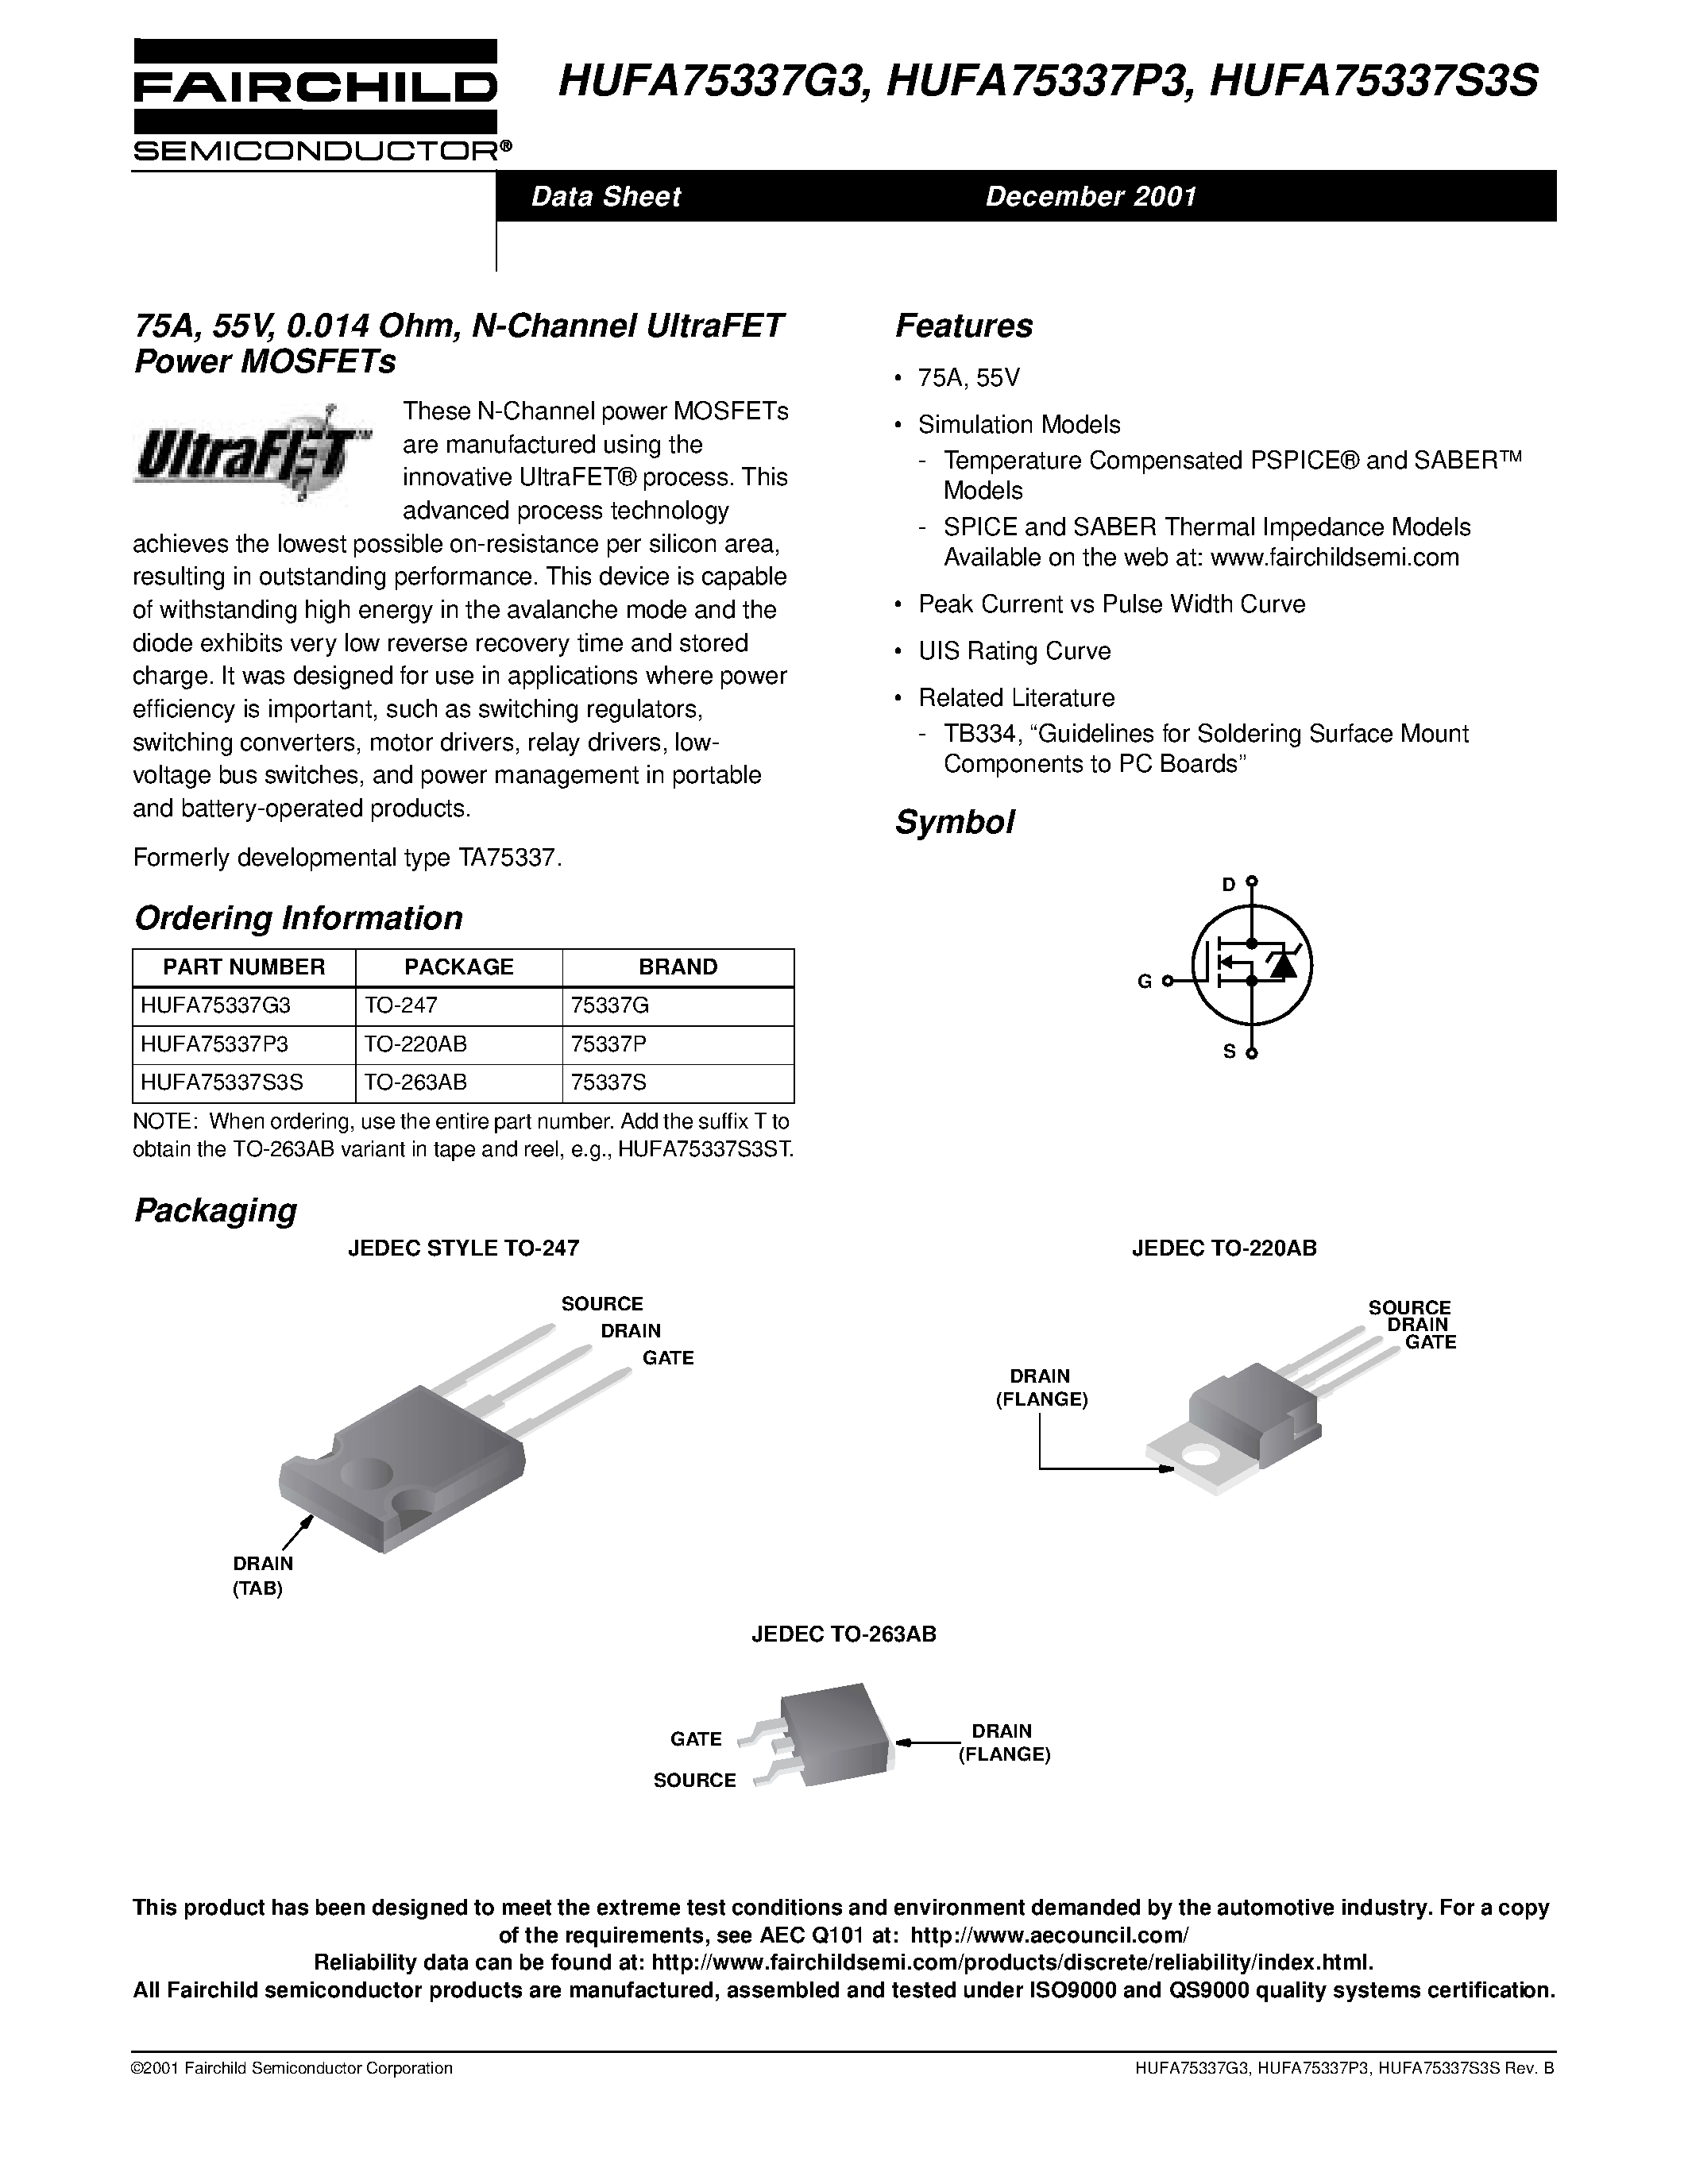 Даташит HUFA75332P3 - 60A/ 55V/ 0.019 Ohm/ N-Channel UltraFET Power MOSFETs страница 1